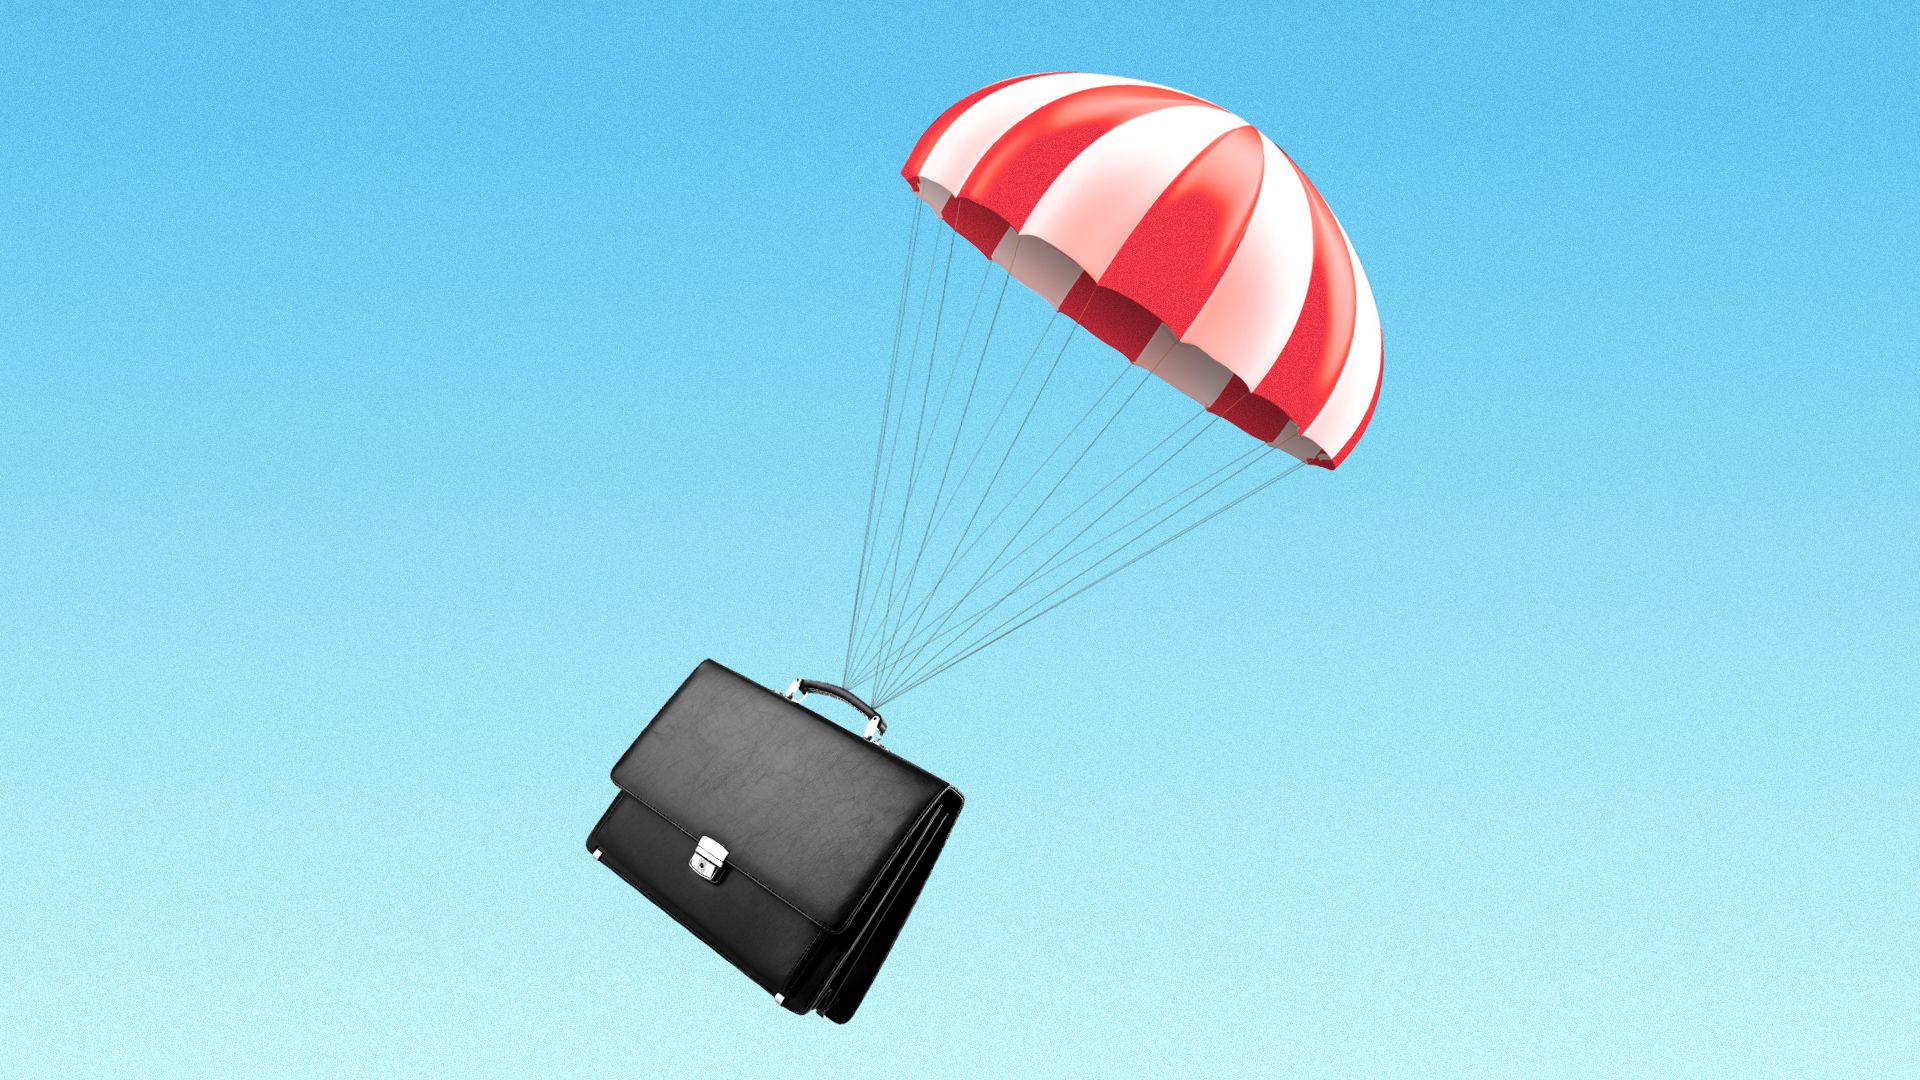 Illustration of a parachute with a briefcase.